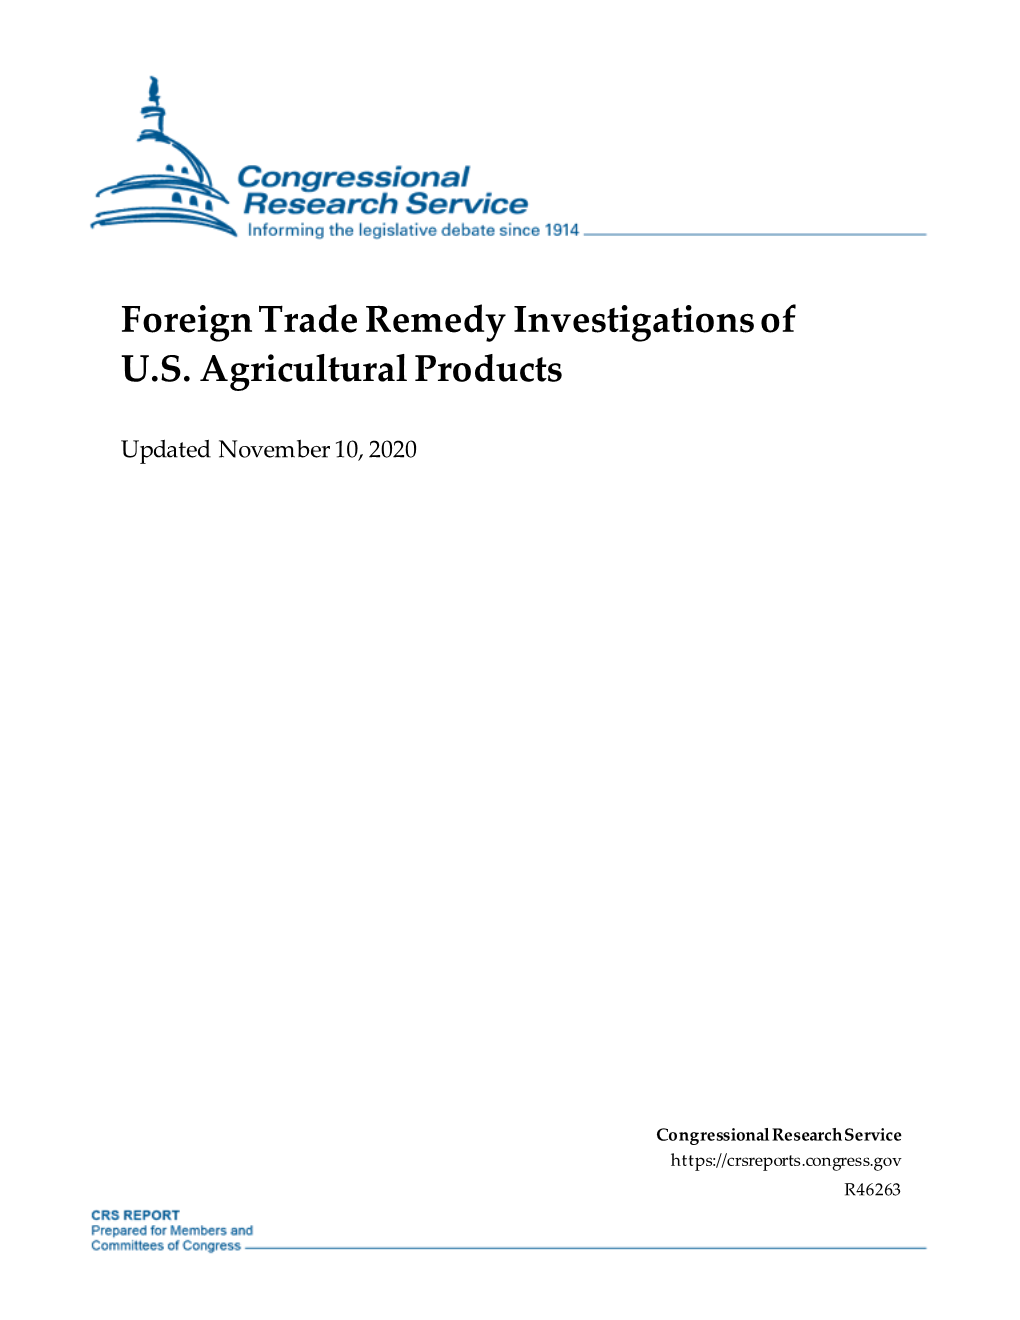 Foreign Trade Remedy Investigations of U.S